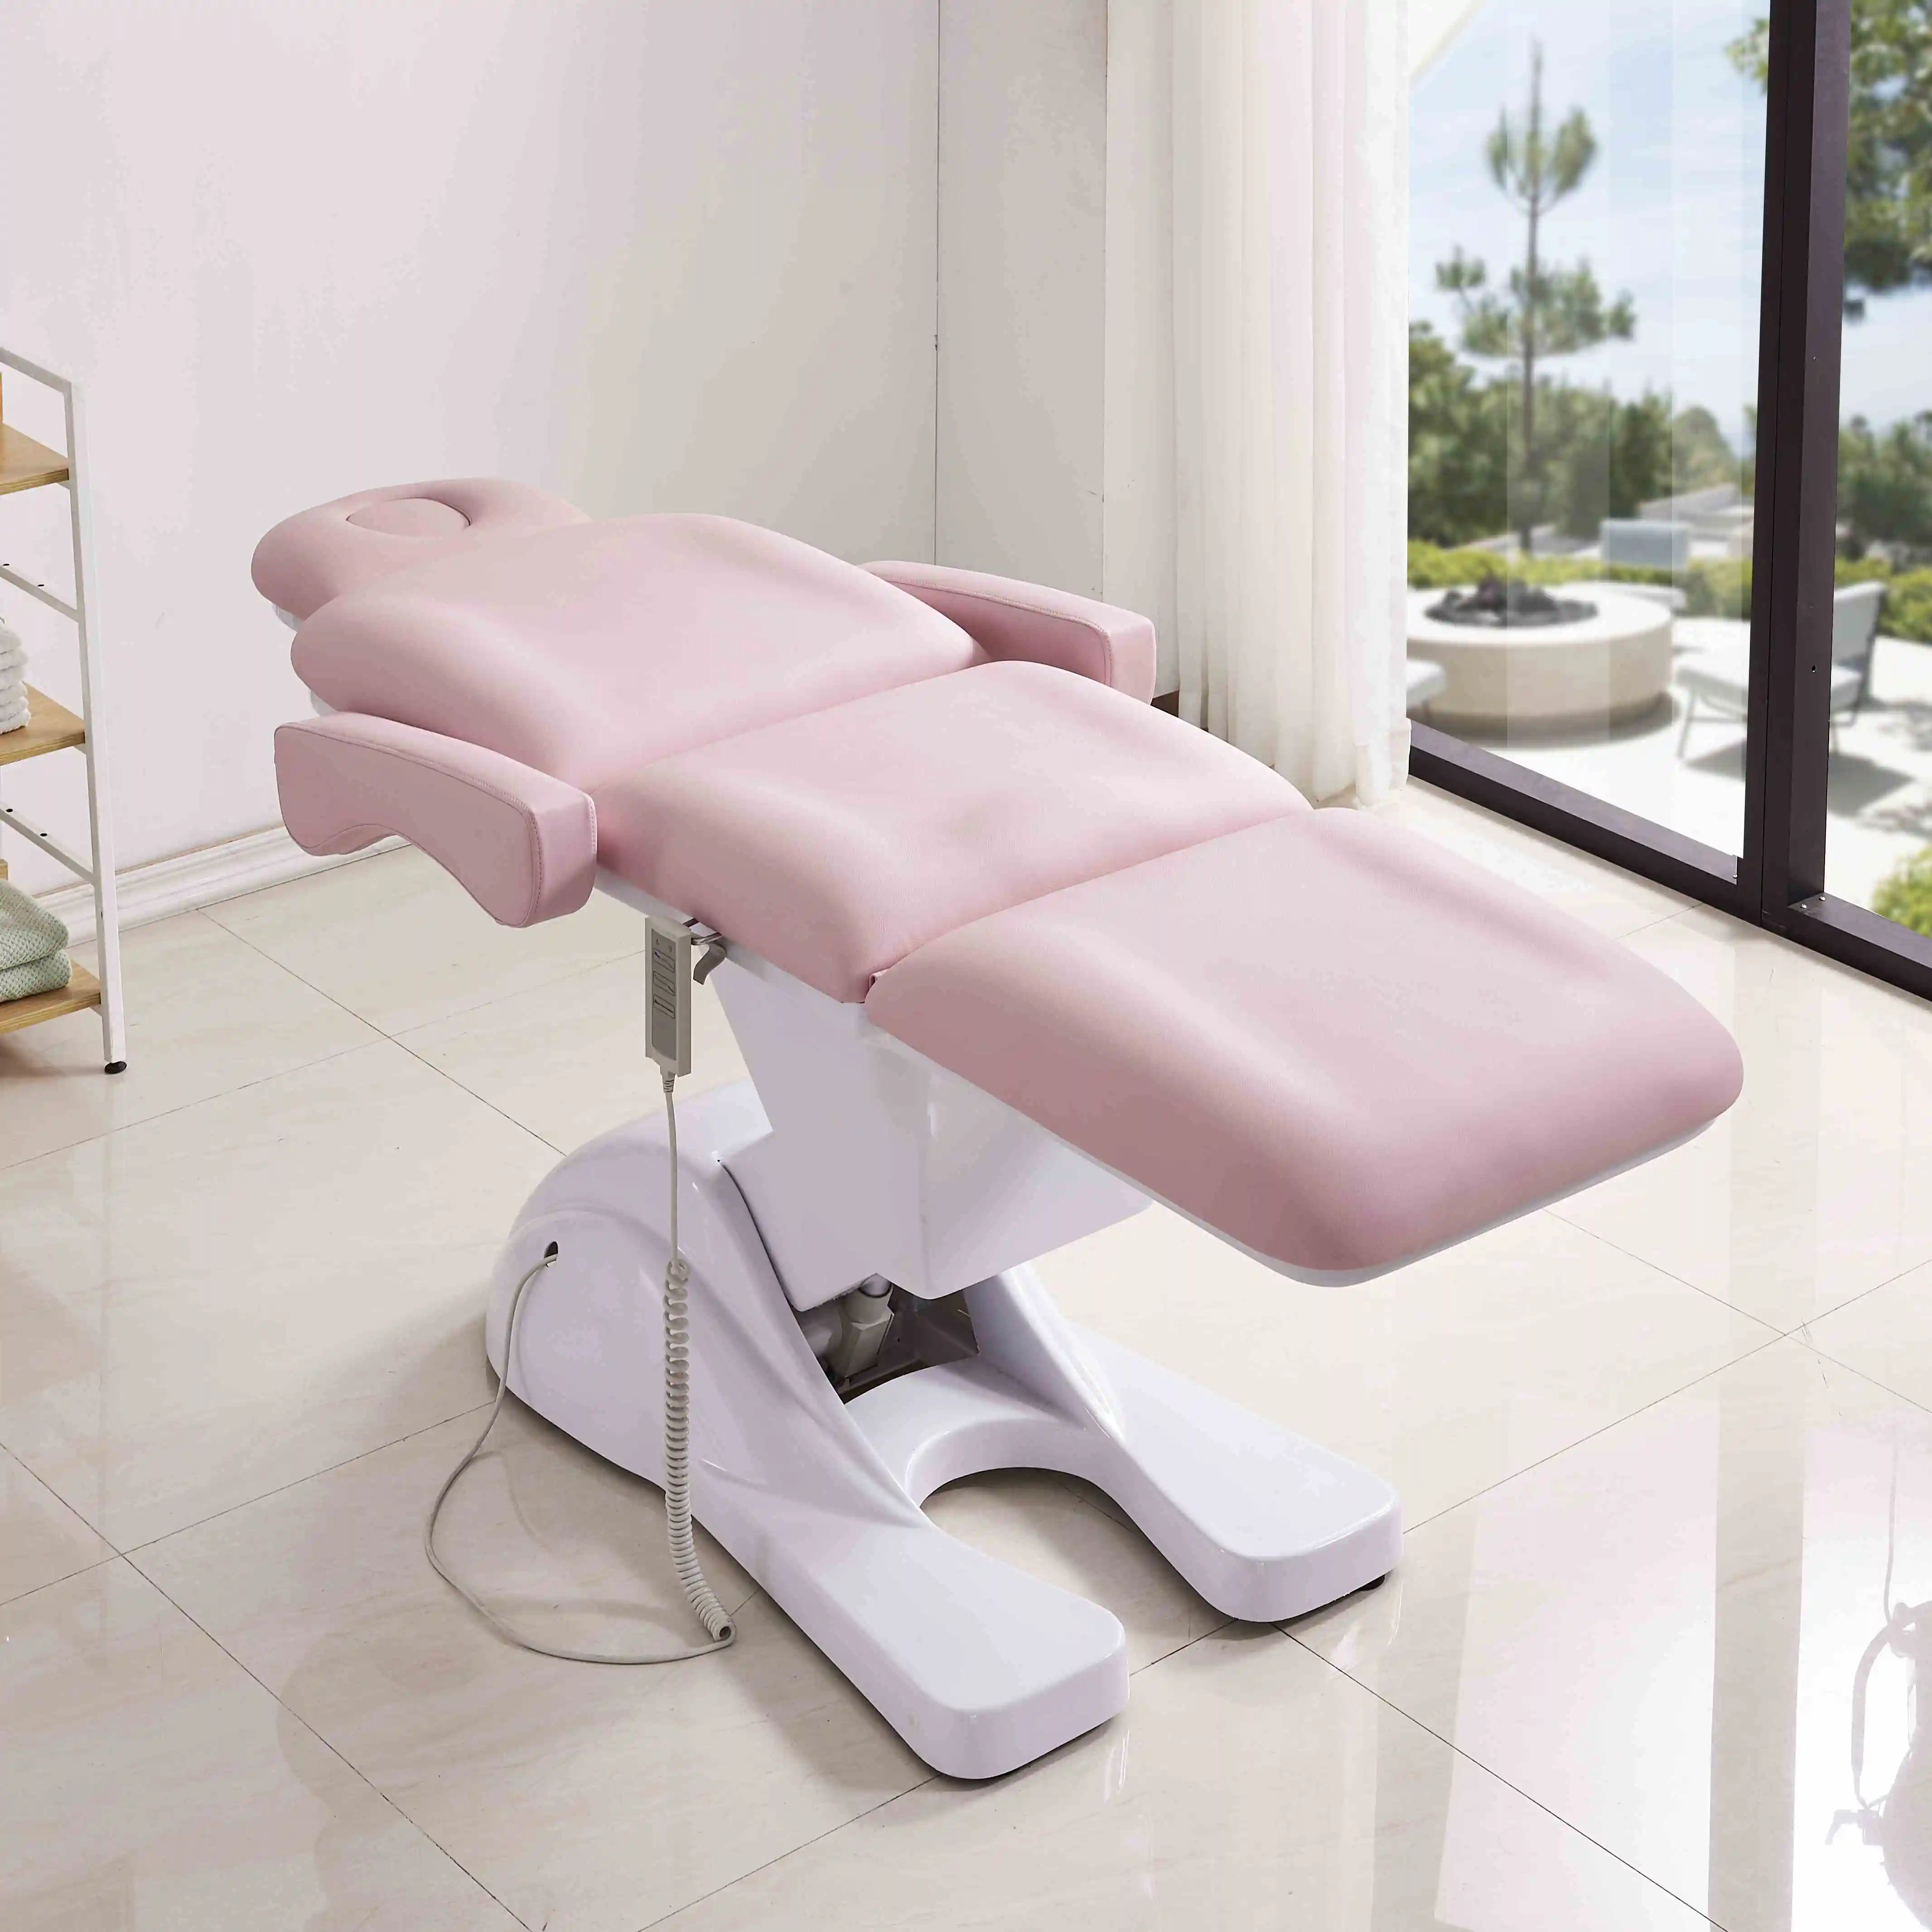 Salon beauty bed cosmetic facial luxury beauty bed pink hair salon equipment furniture chair beauty sofa furniture for salon